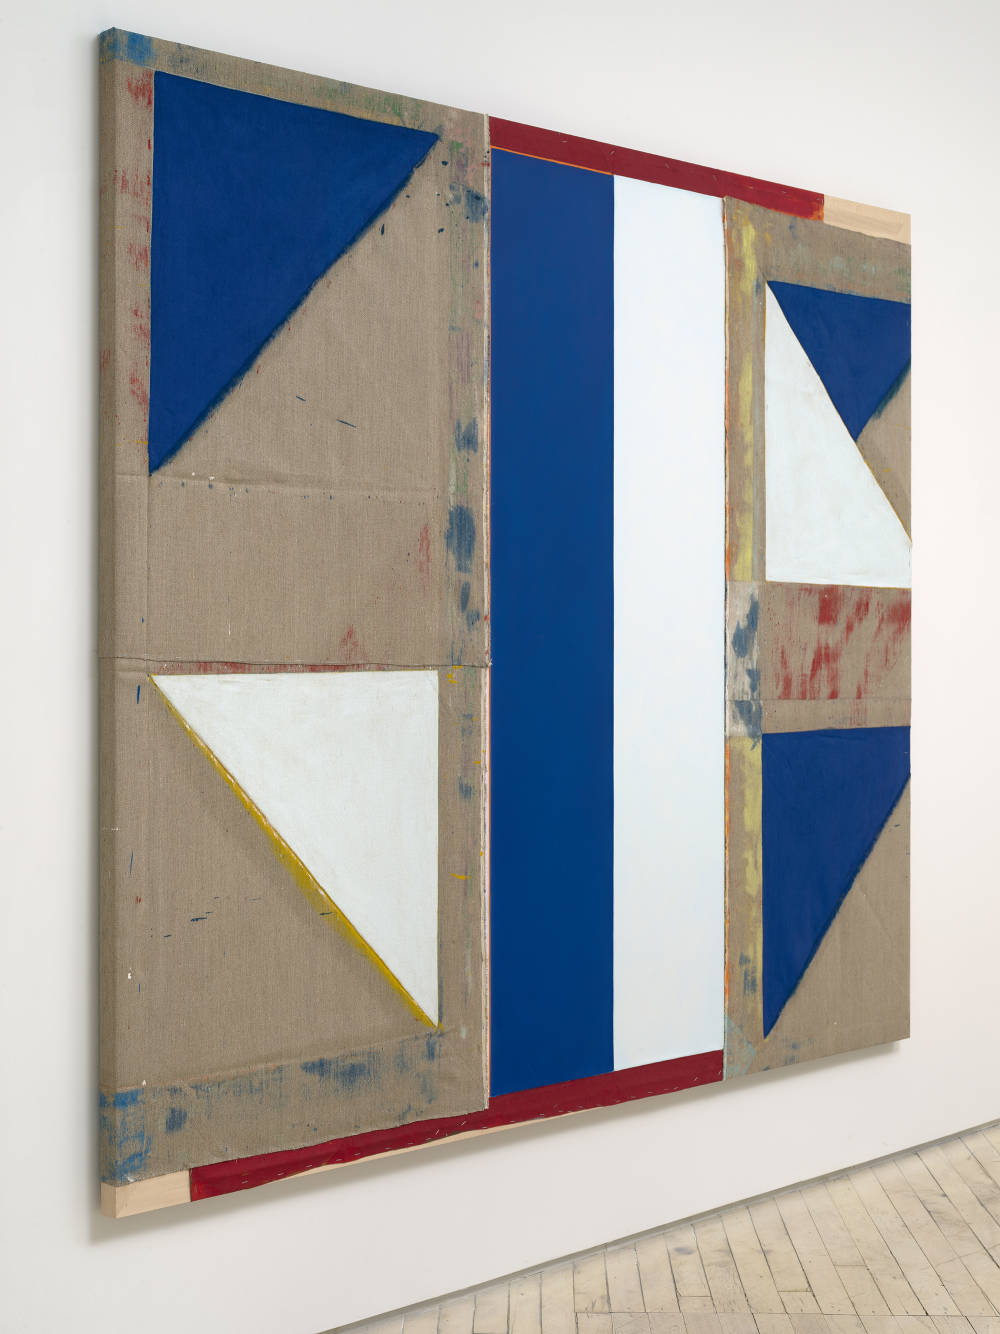 A side view of a large abstract painting. The painting consists of differently shaped areas of solid colors ranging from blue, red, white to brown. 